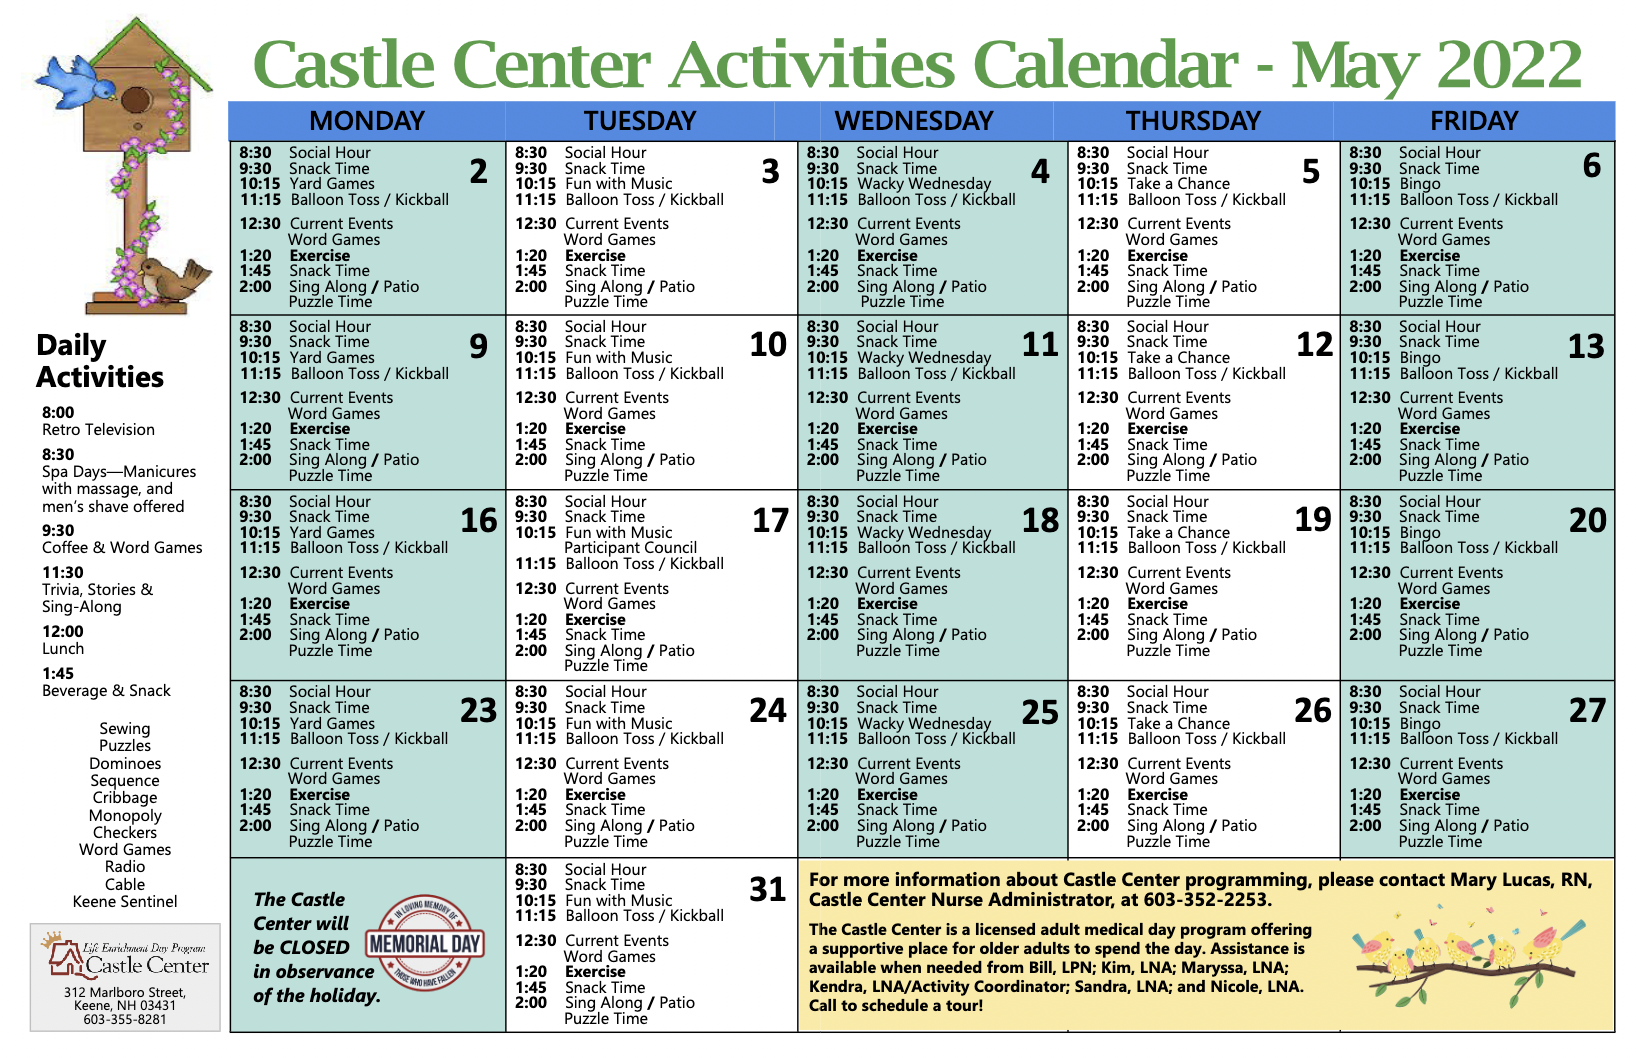 Castle Center Activities for May 2022